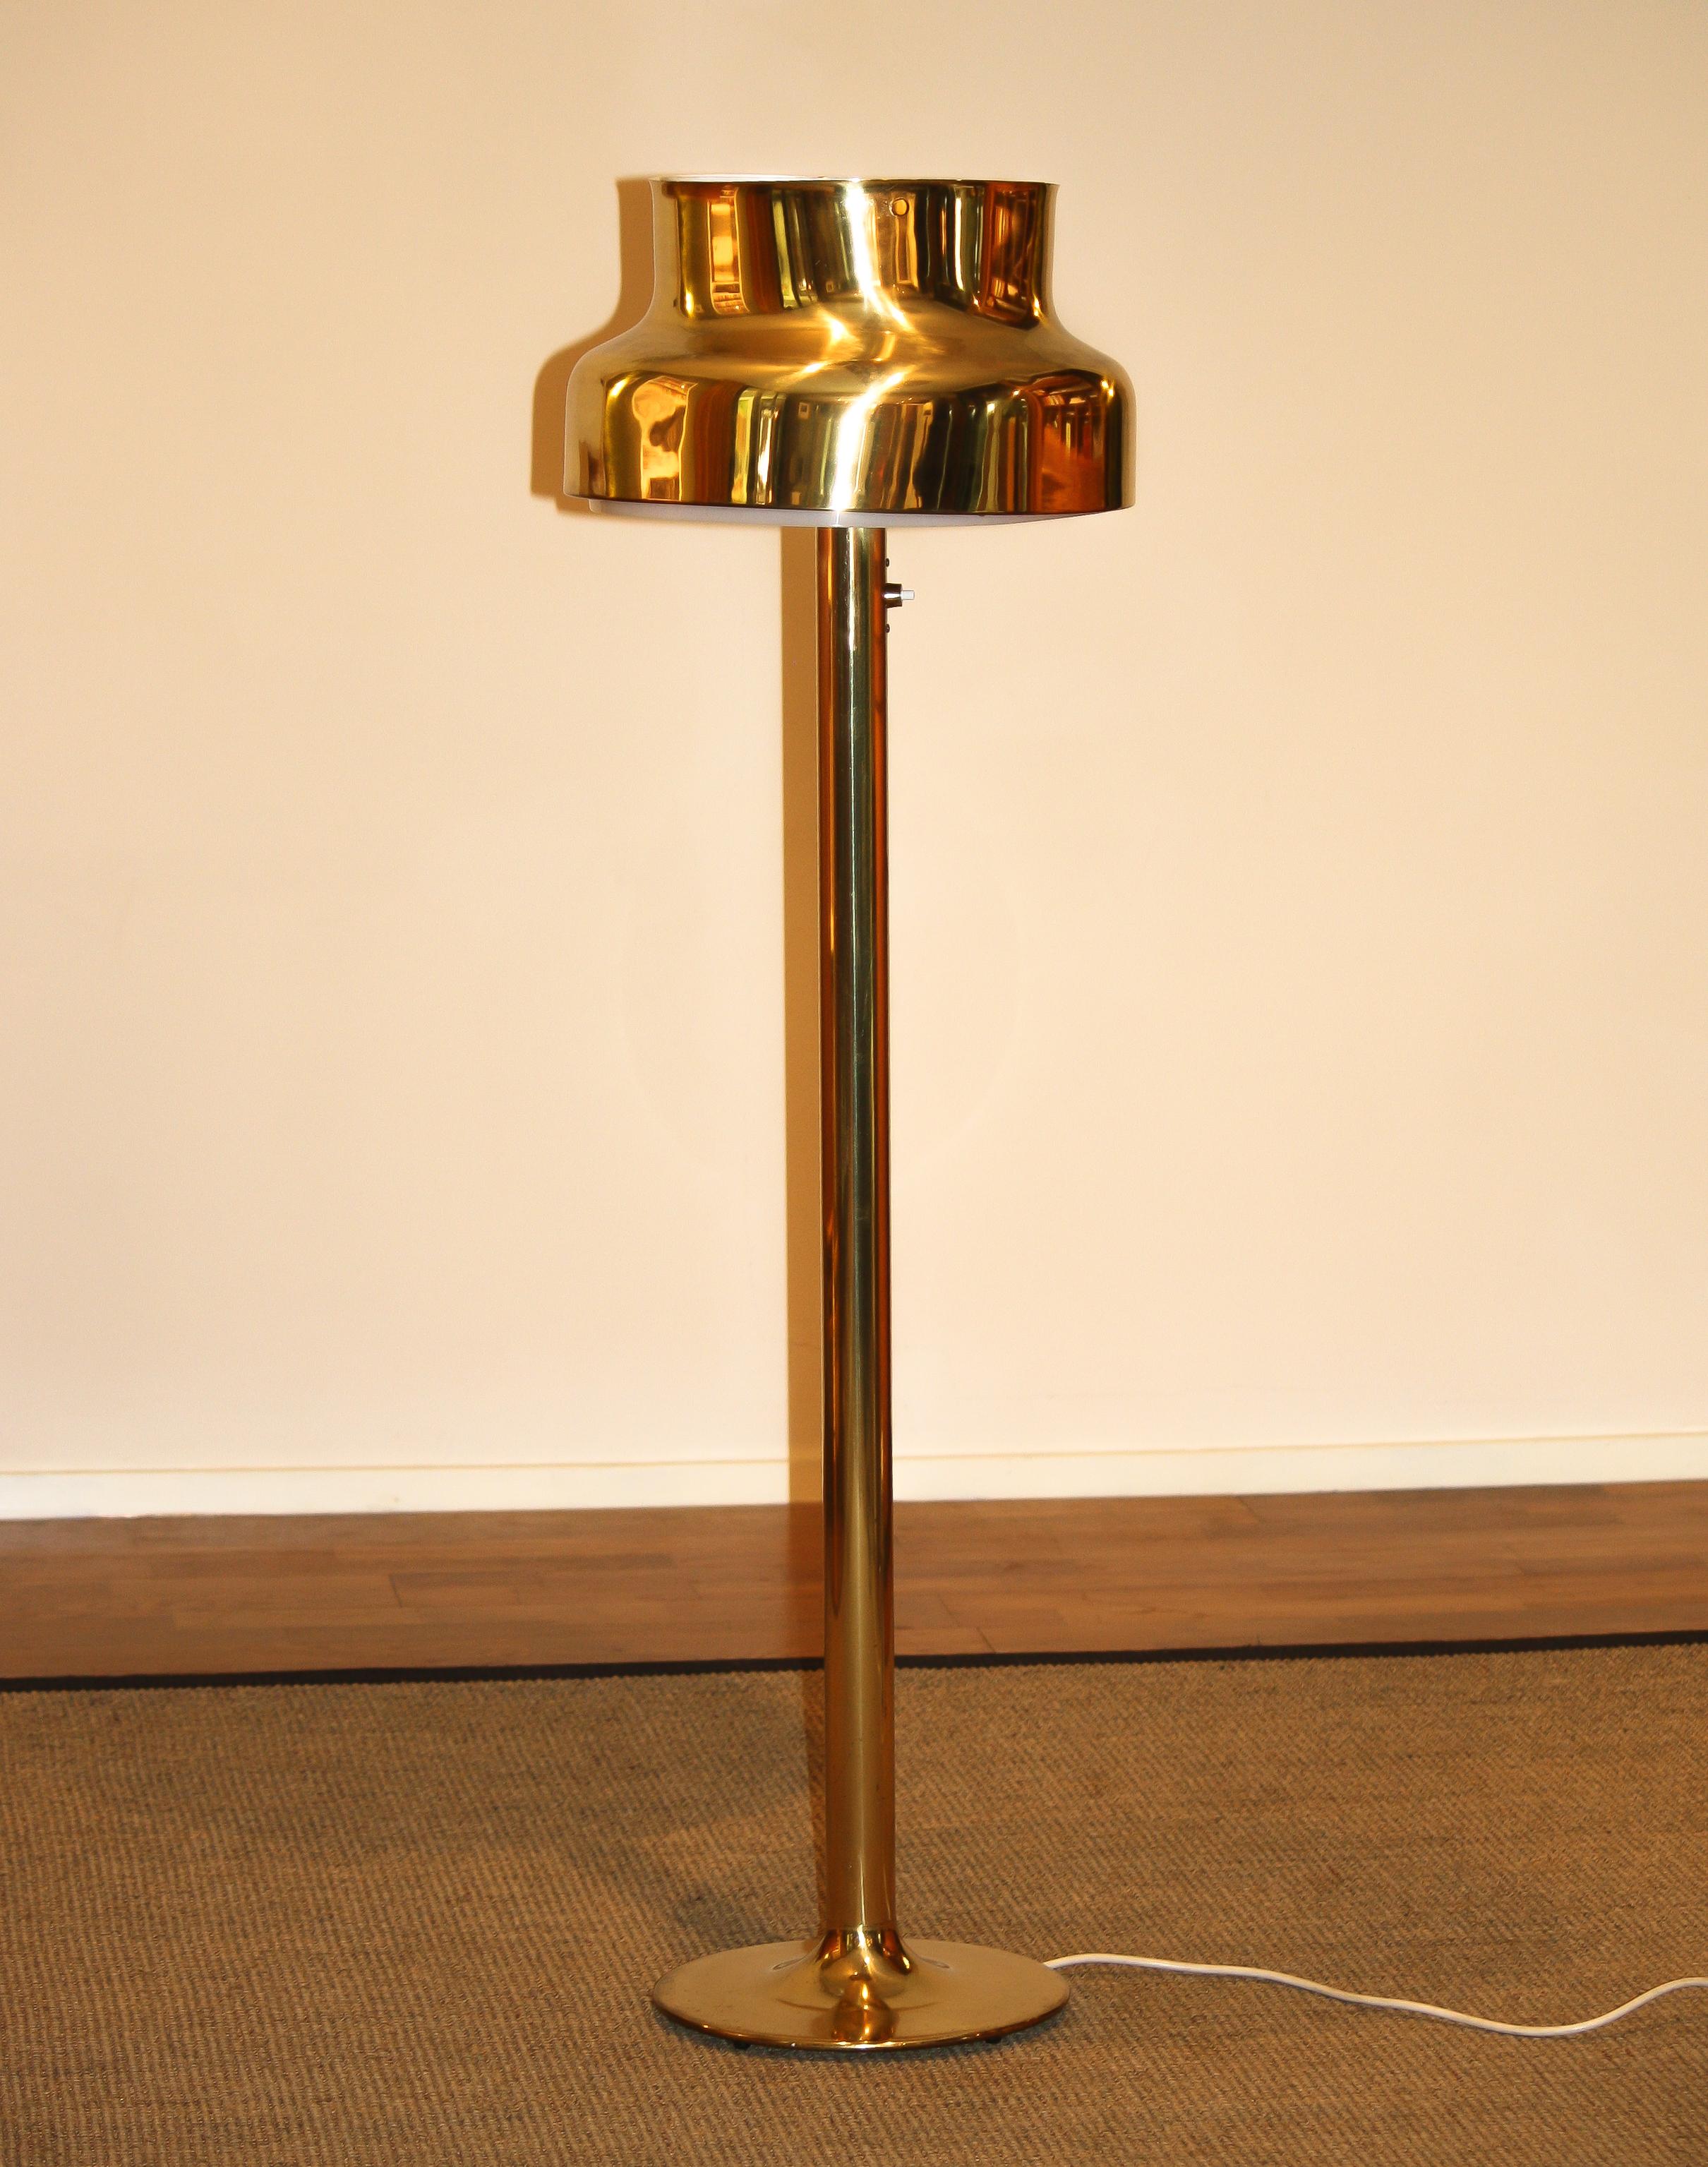 1960s Golden or Brass Floor Lamp by Anders Pehrson ‘Bumling’ for Ateljé Lyktan 2